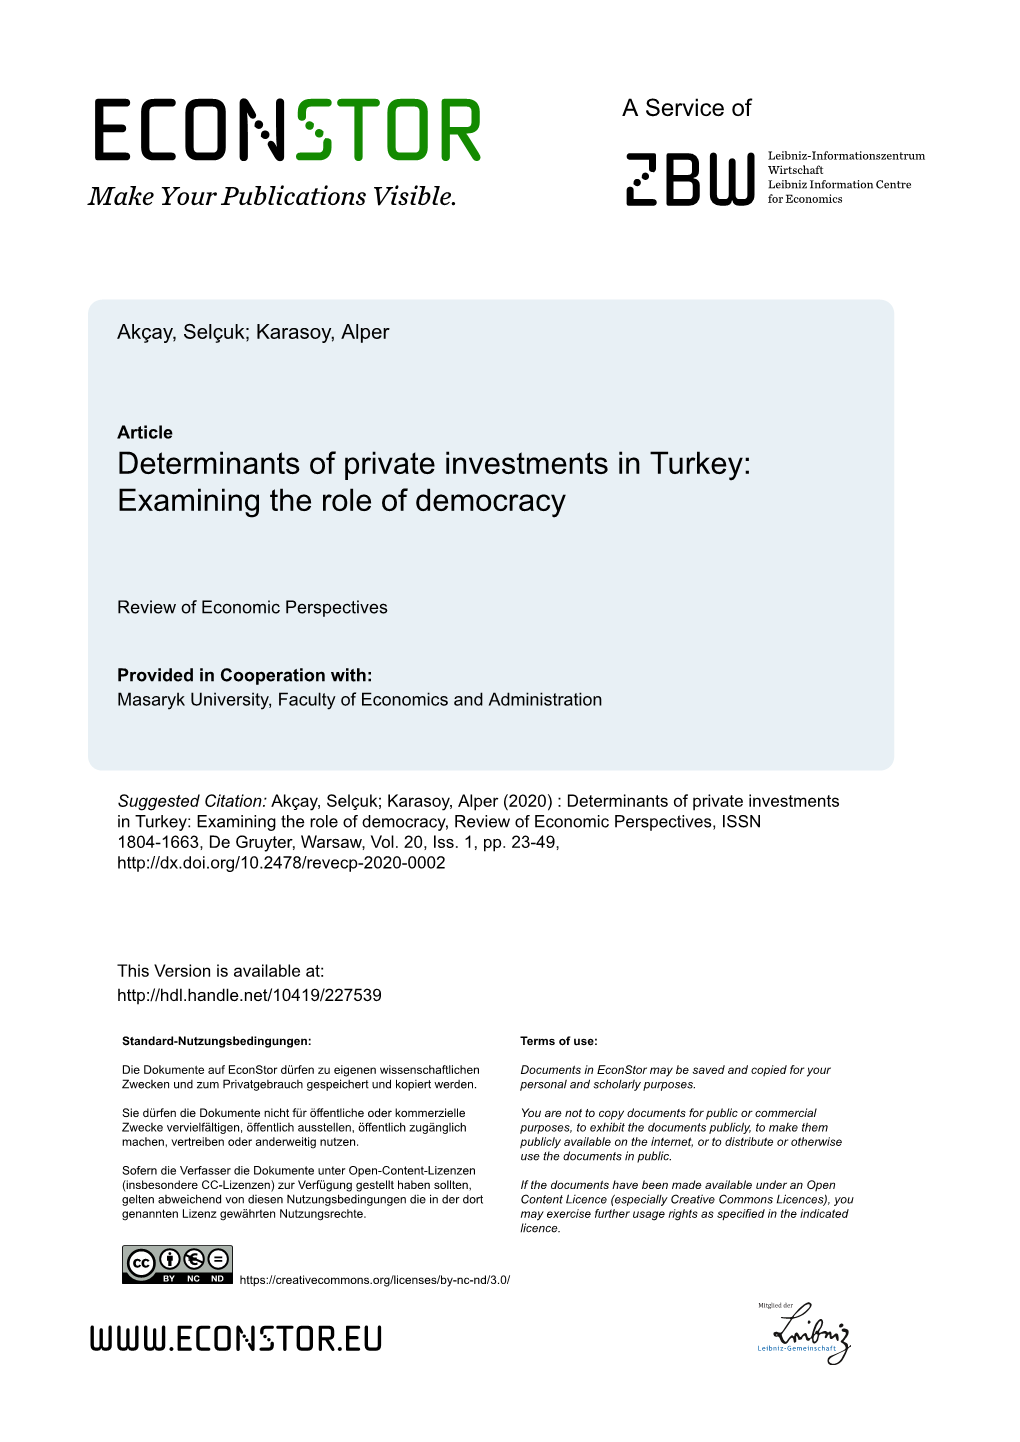 Determinants of Private Investments in Turkey: Examining the Role of Democracy